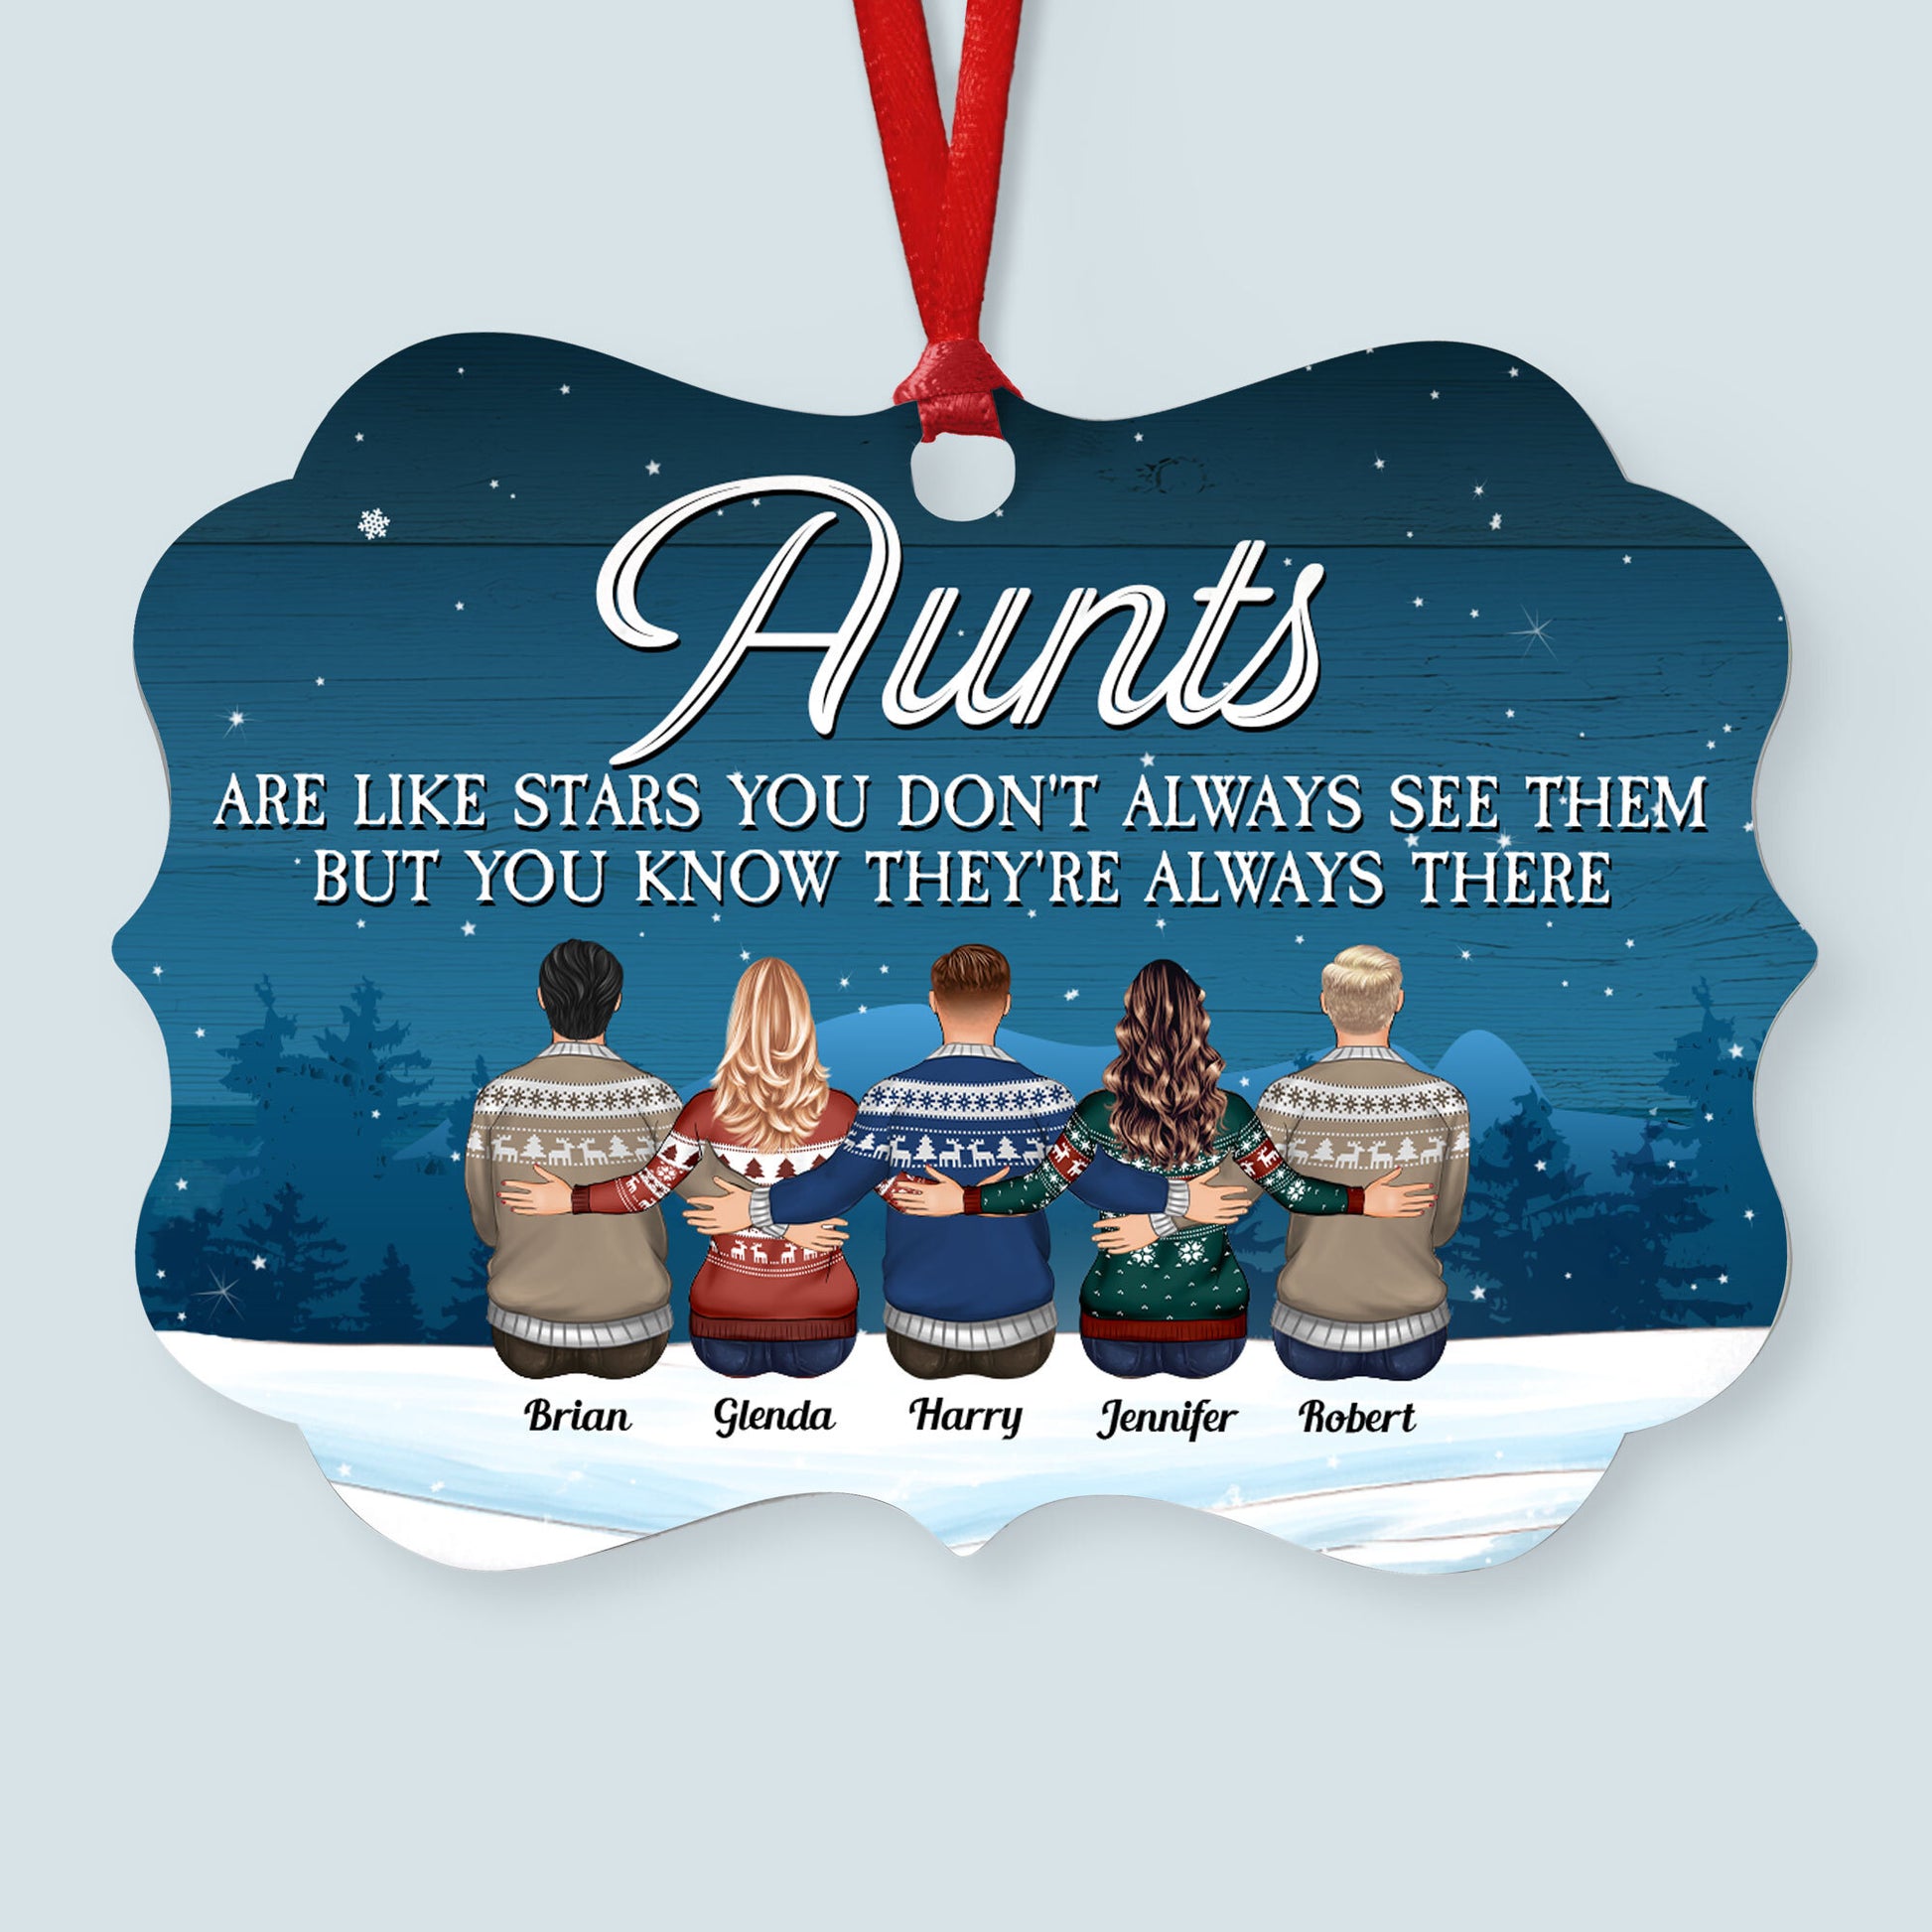 Aunts Like You Are Precious And Few - Personalized Aluminum Ornament - Christmas Gift For Aunts, Gift For Uncles, Gift For Cousins, Gift For Family - Family Hugging